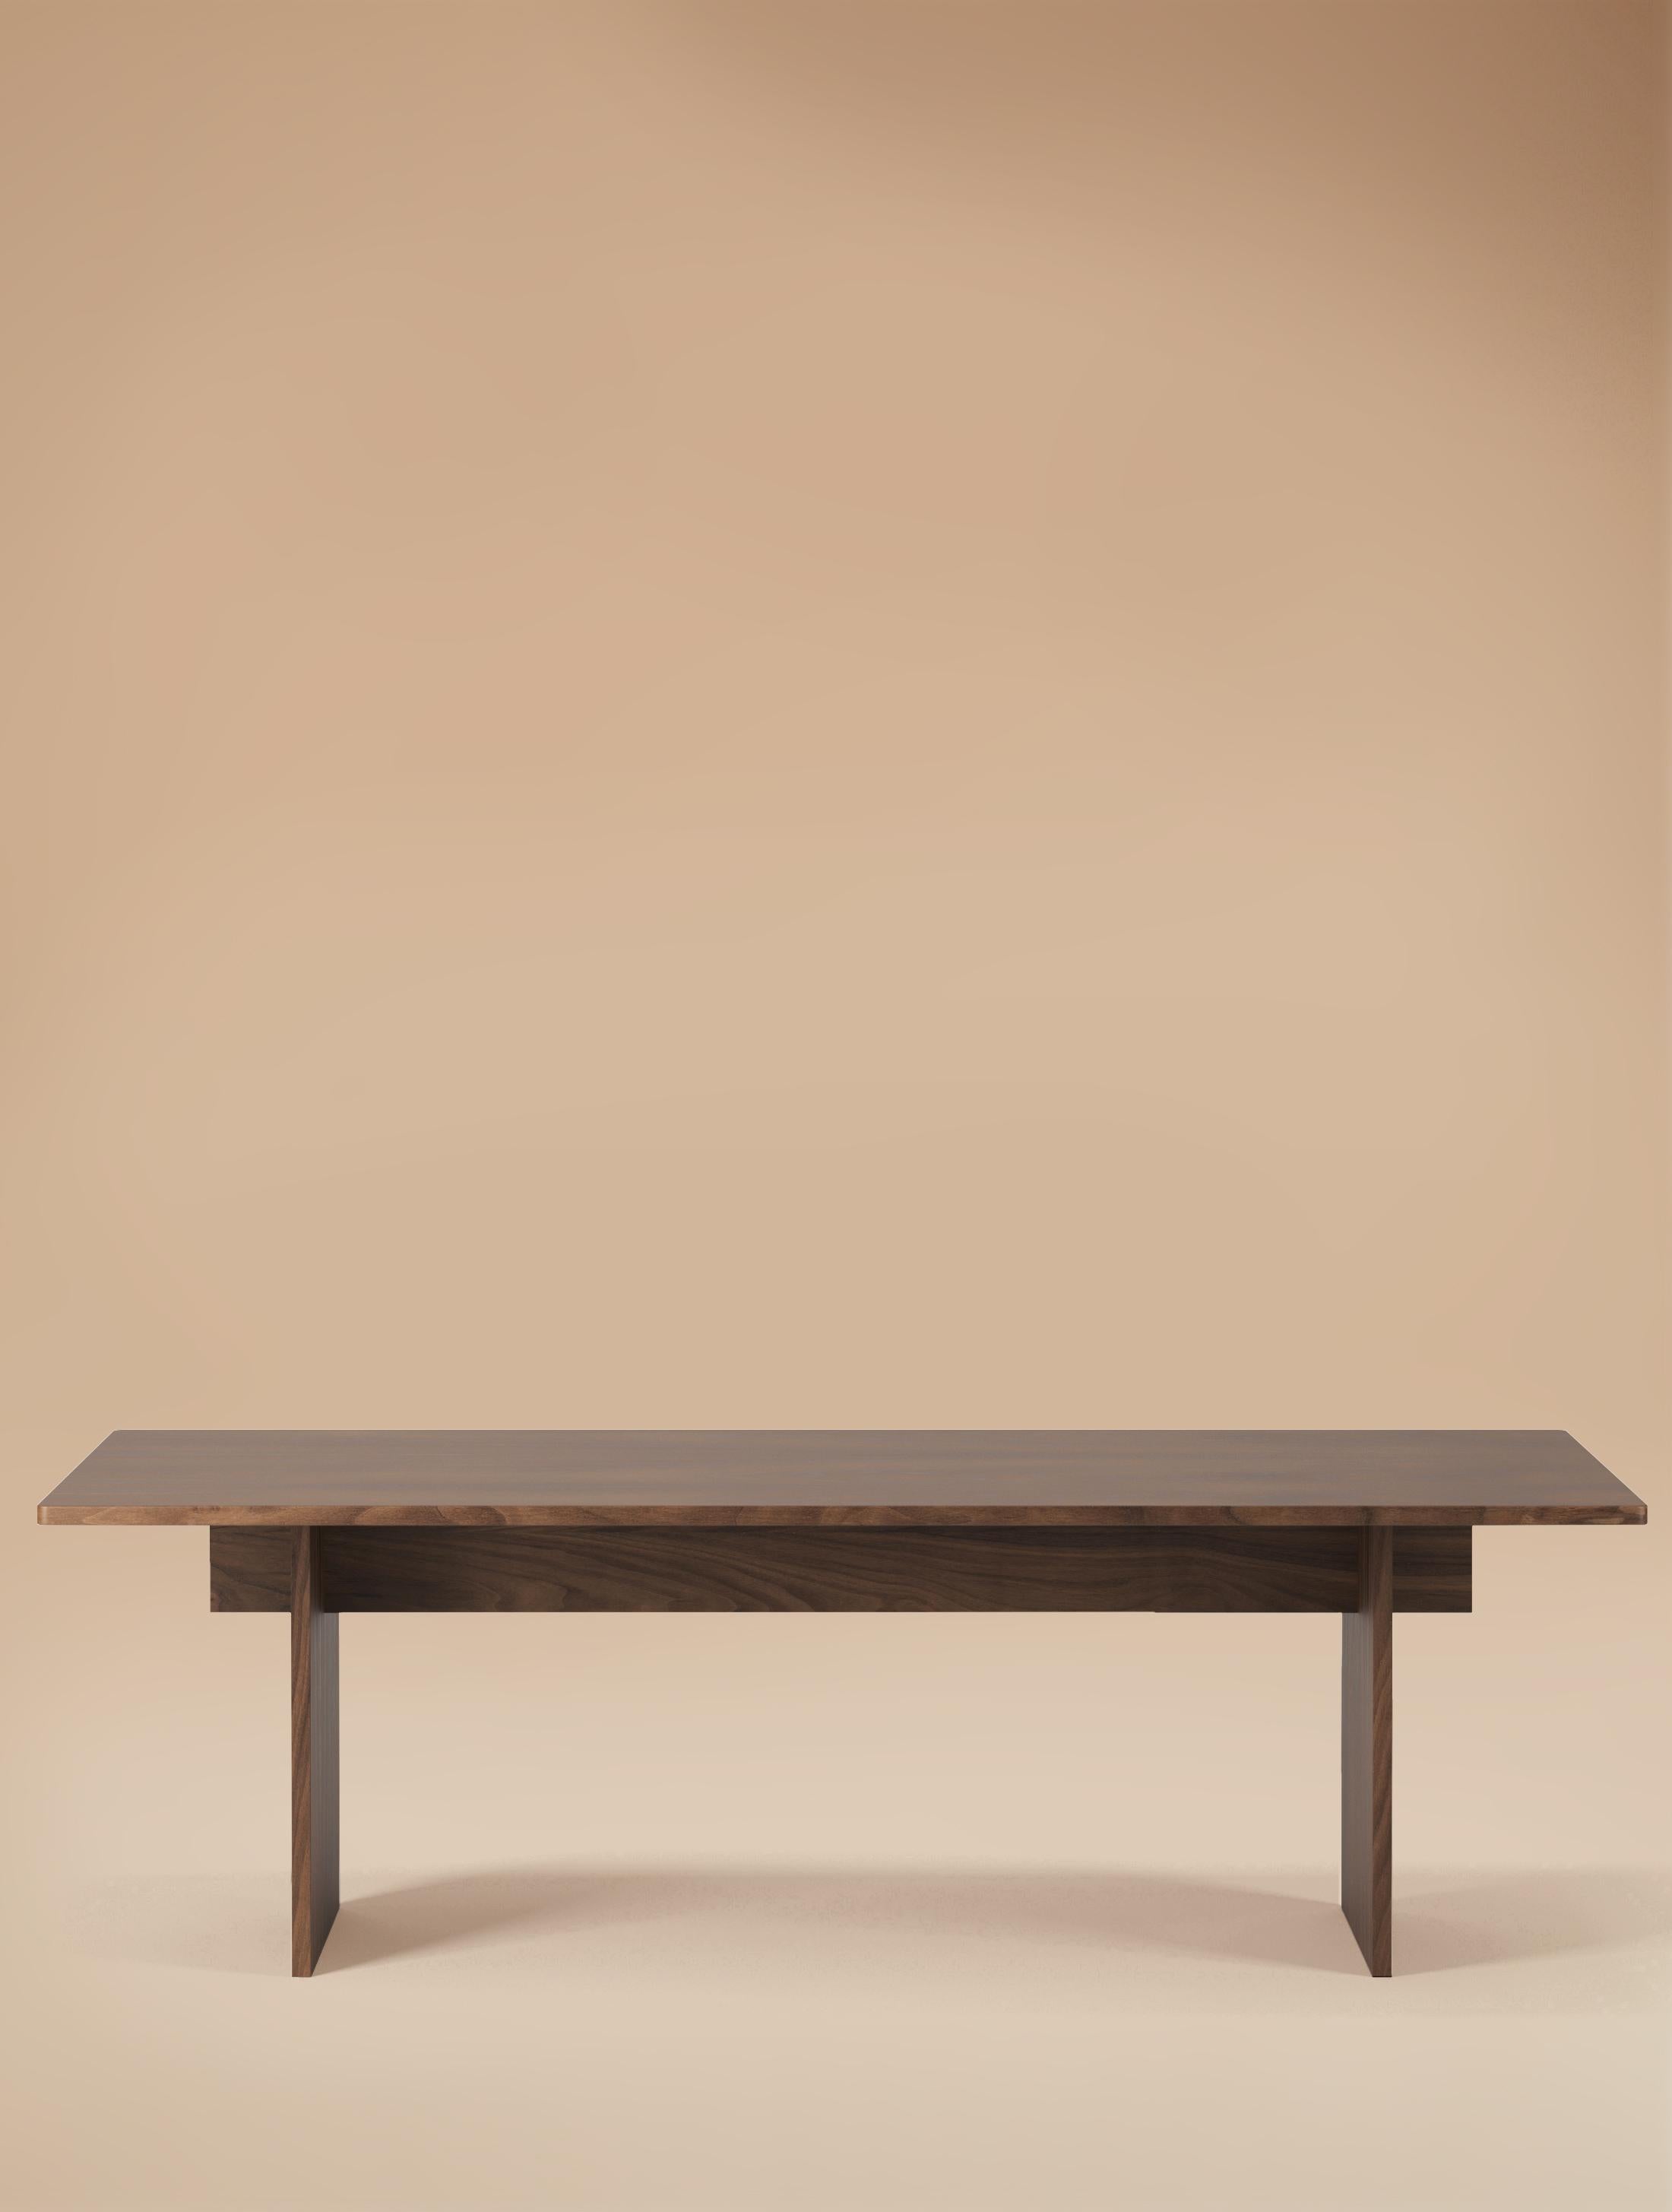 Minimalist 6 Seater Faure Dining Table Handcrafted in Walnut by Kevin Frankental